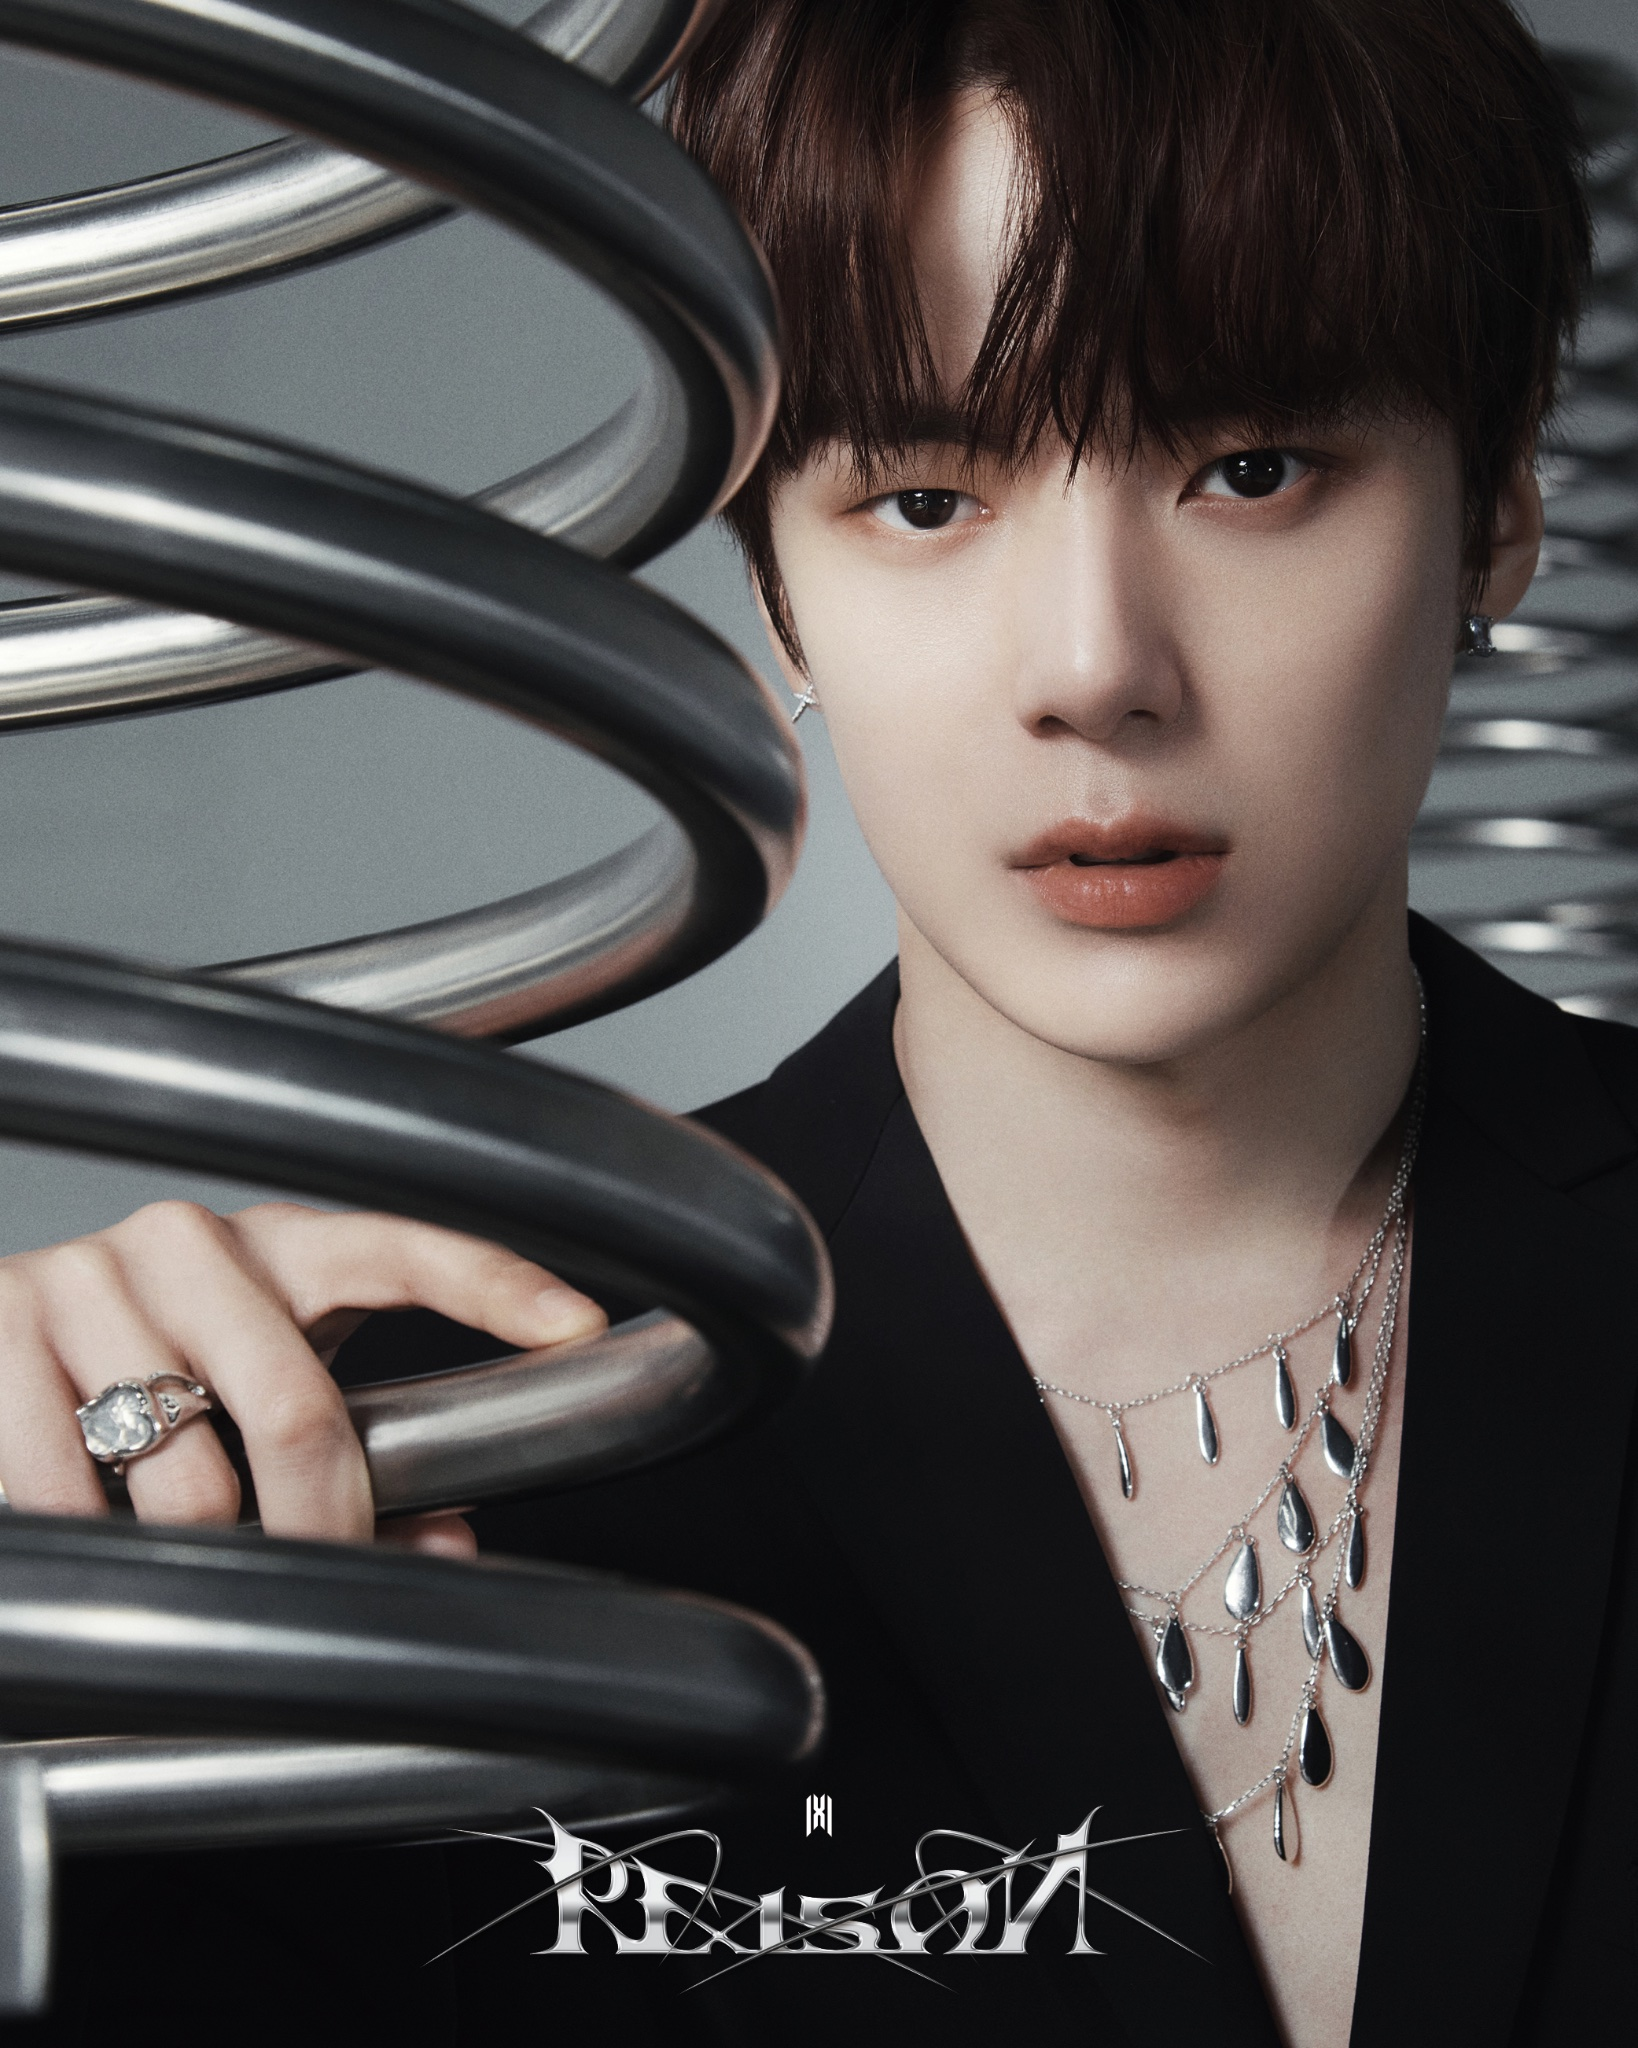 https://static.wikia.nocookie.net/kpop/images/6/68/MONSTA_X_Minhyuk_Reason_concept_photo_3.png/revision/latest?cb=20230102181427